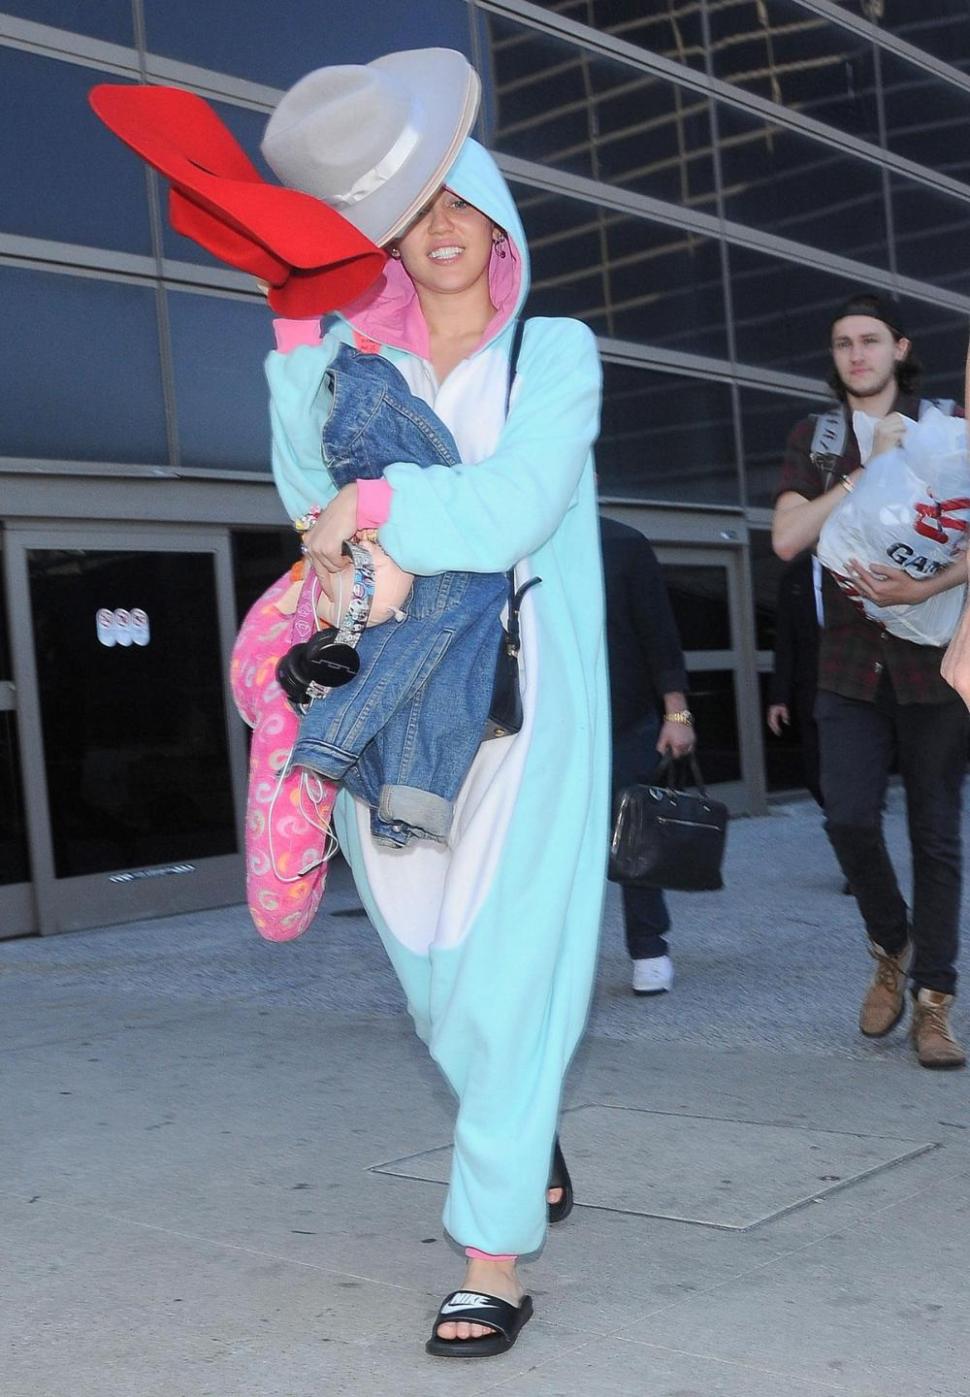 What is Miley Cyrus wearing now? Cyrus arrived back in L.A. from Australia wearing this.